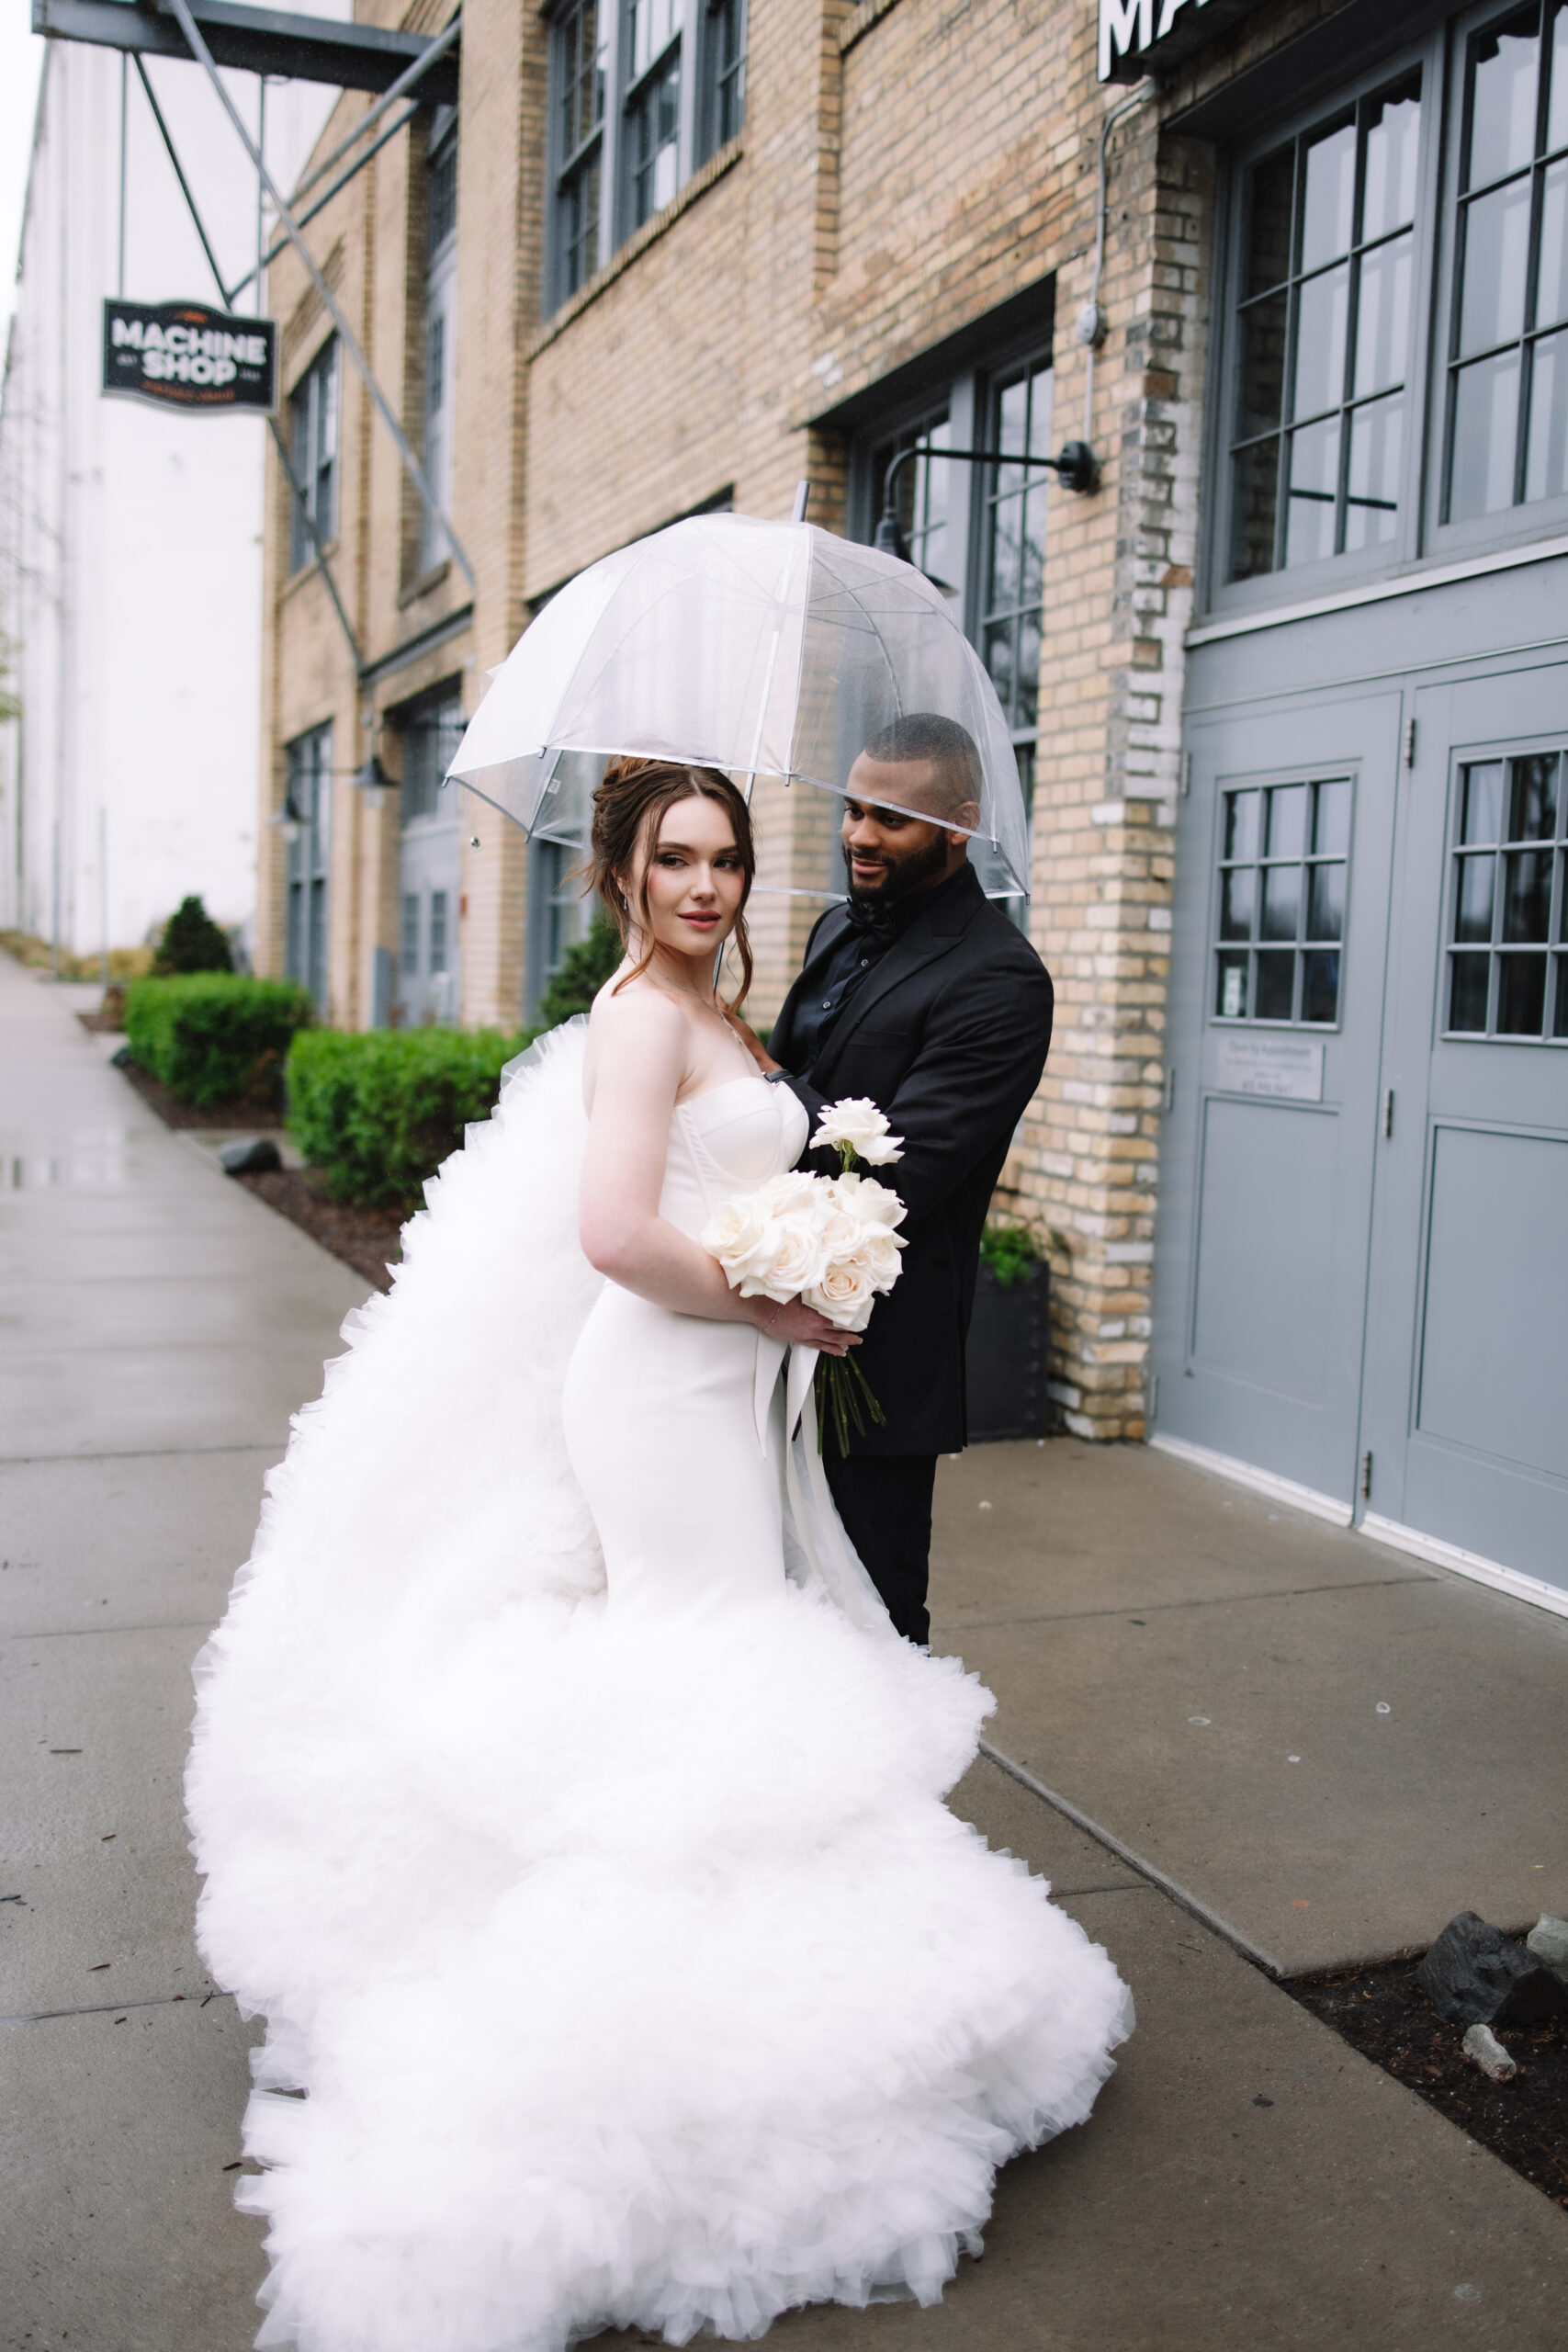 A bride in a voluptuous wedding dress standing with her groom under an umbrella in front of The Machine Shop wedding venue in Minneapolis